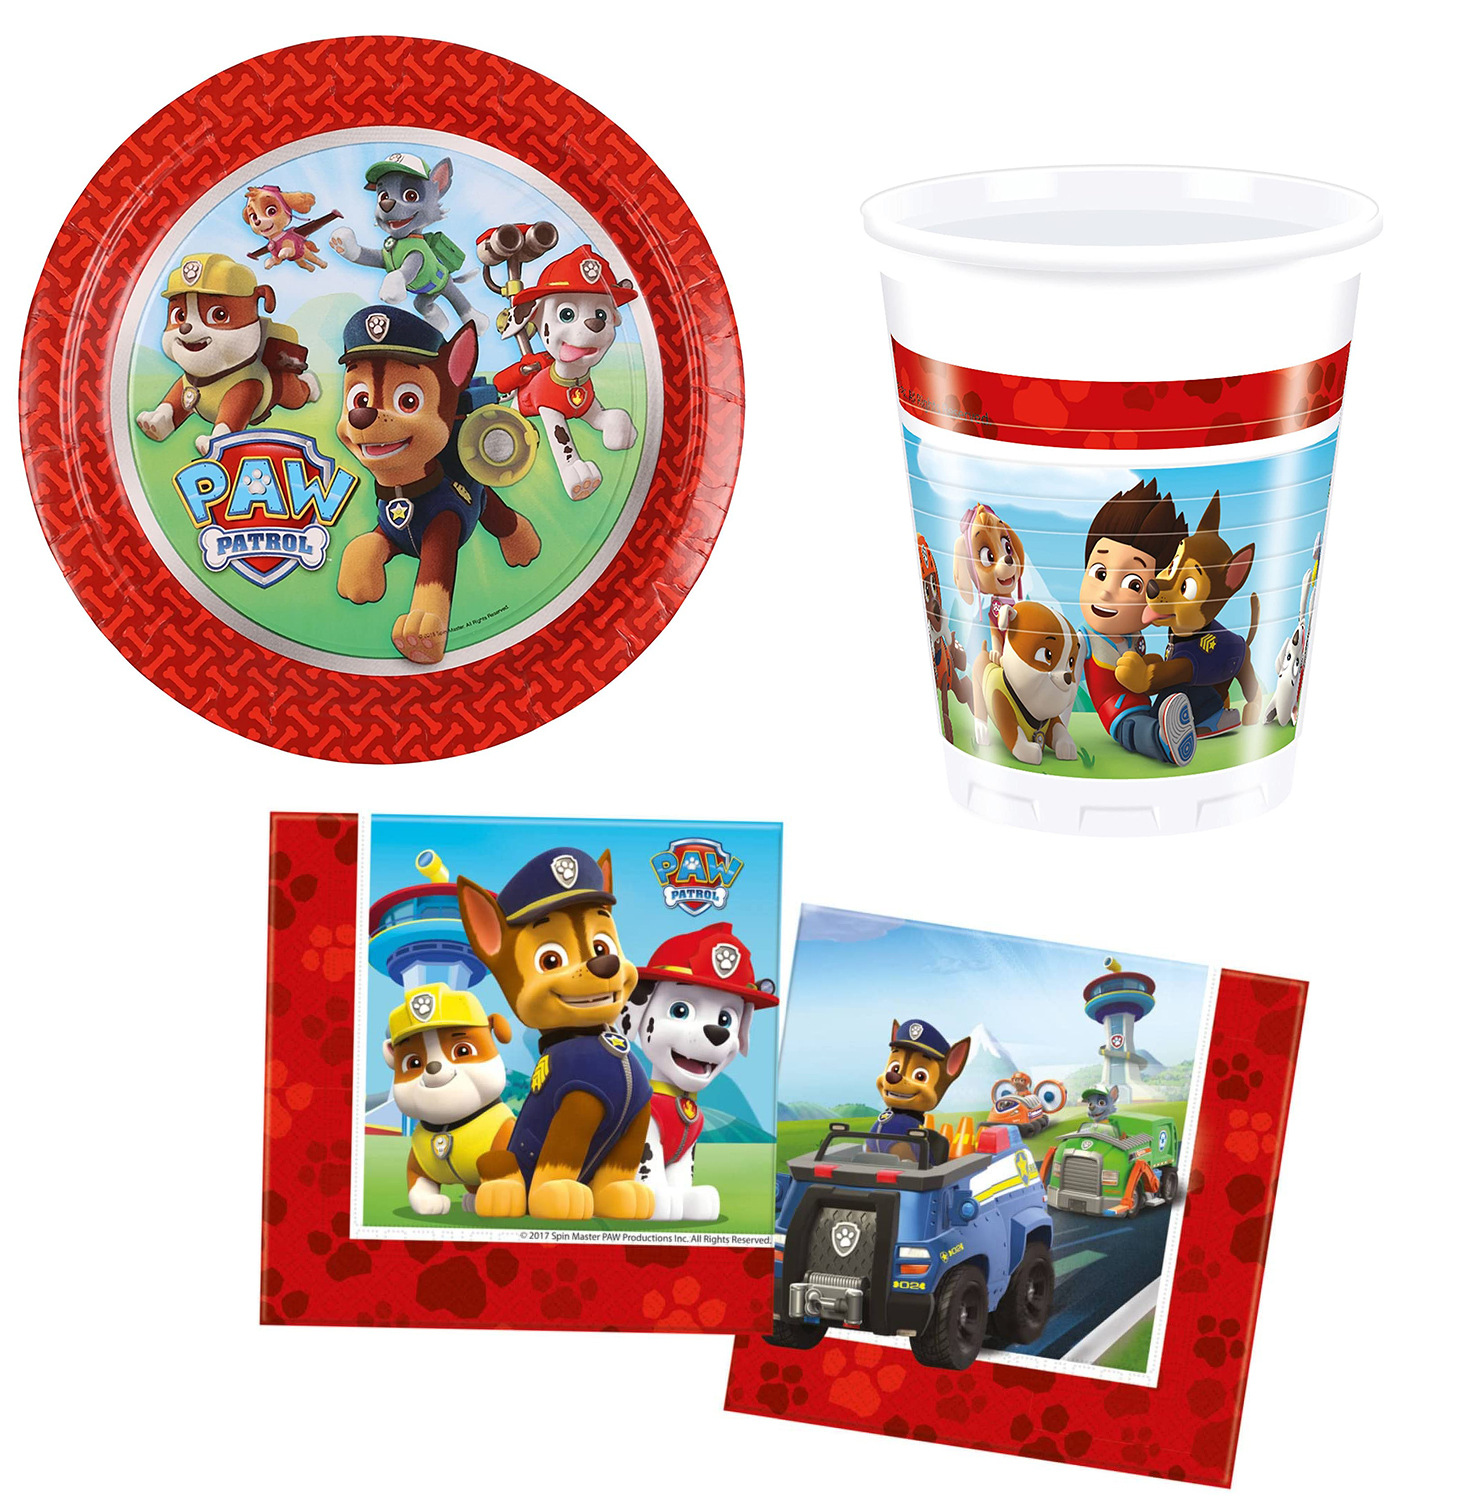 KIT PARTY PAW PATROL Set Completo Festa Compleanno Bambino Bambina